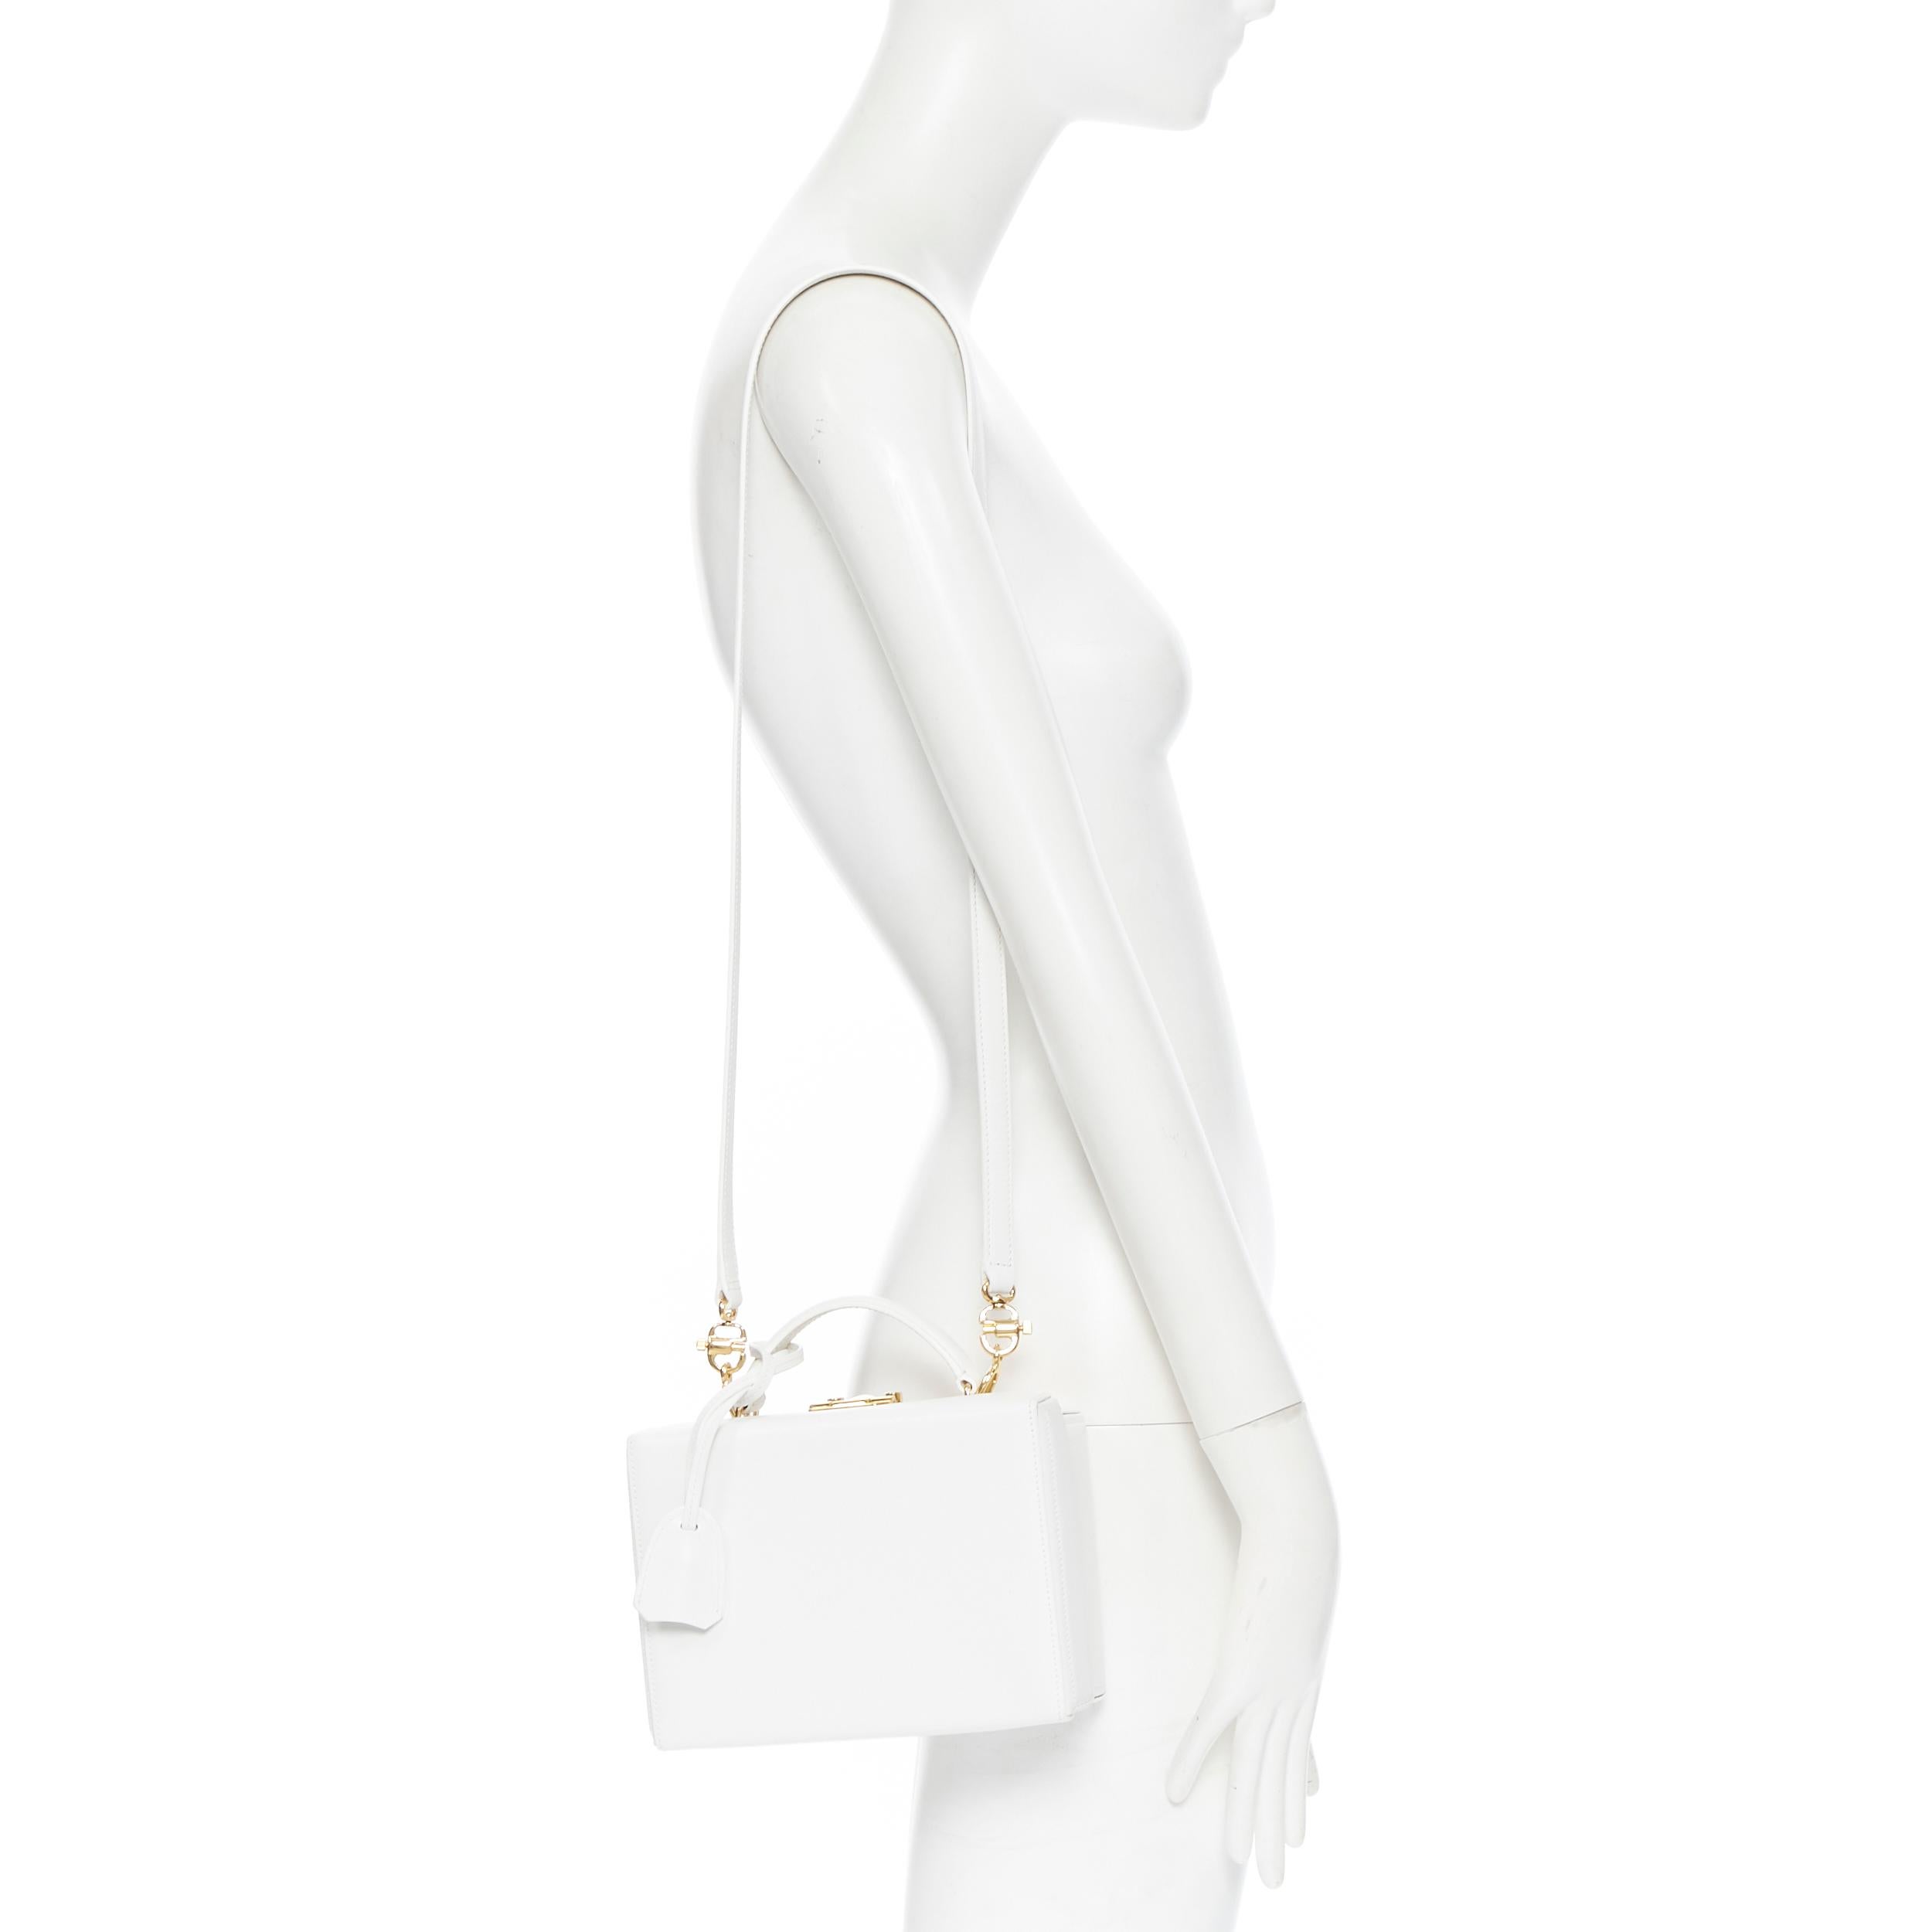 MARK CROSS Small Grace white leather gold top handle satchel vanity box bag
Brand: Mark Cross
Designer: Mark Cross
Model Name / Style: Small Grace 
Material: Leather
Color: White
Pattern: Solid
Closure: Clasp
Extra Detail: Grace Small bag. White